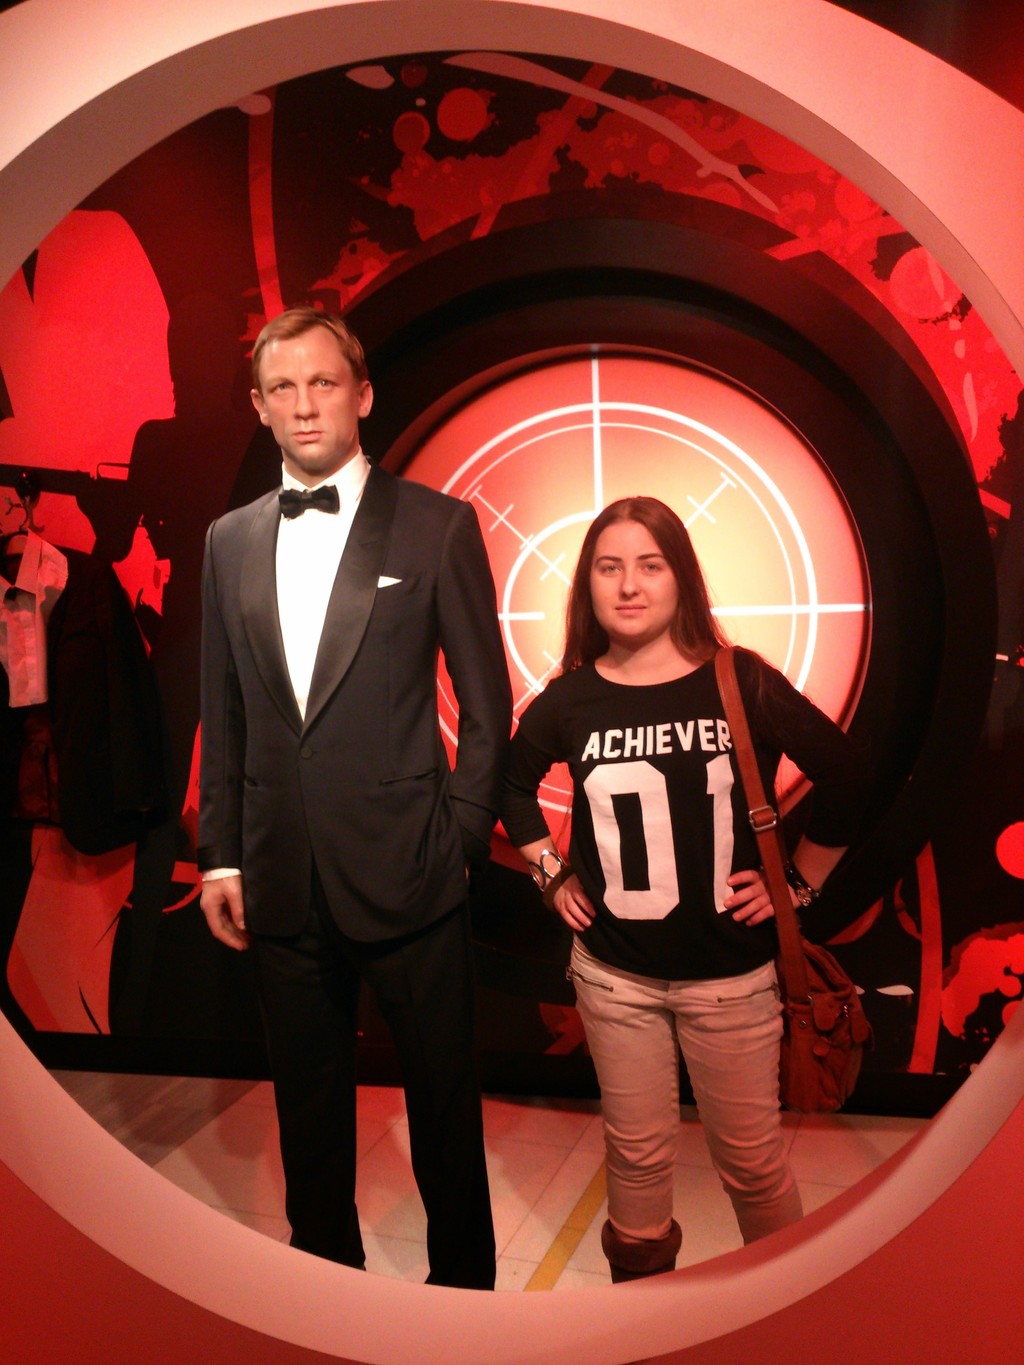 amsterdam-madame-tussauds-great-place-vi